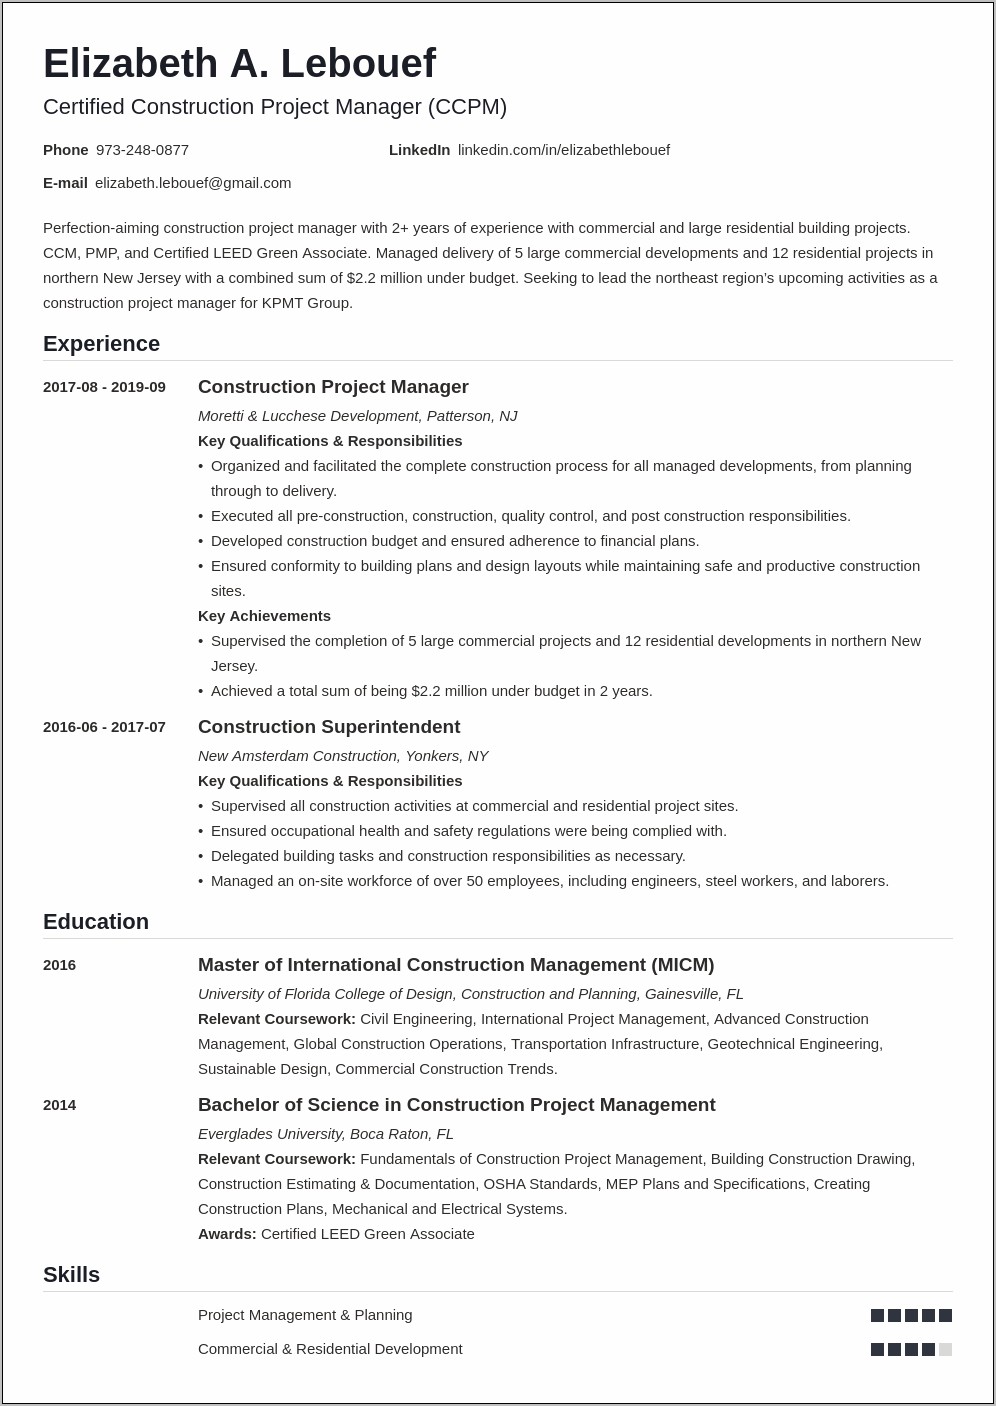 Resume Objective Statement Examples Project Management